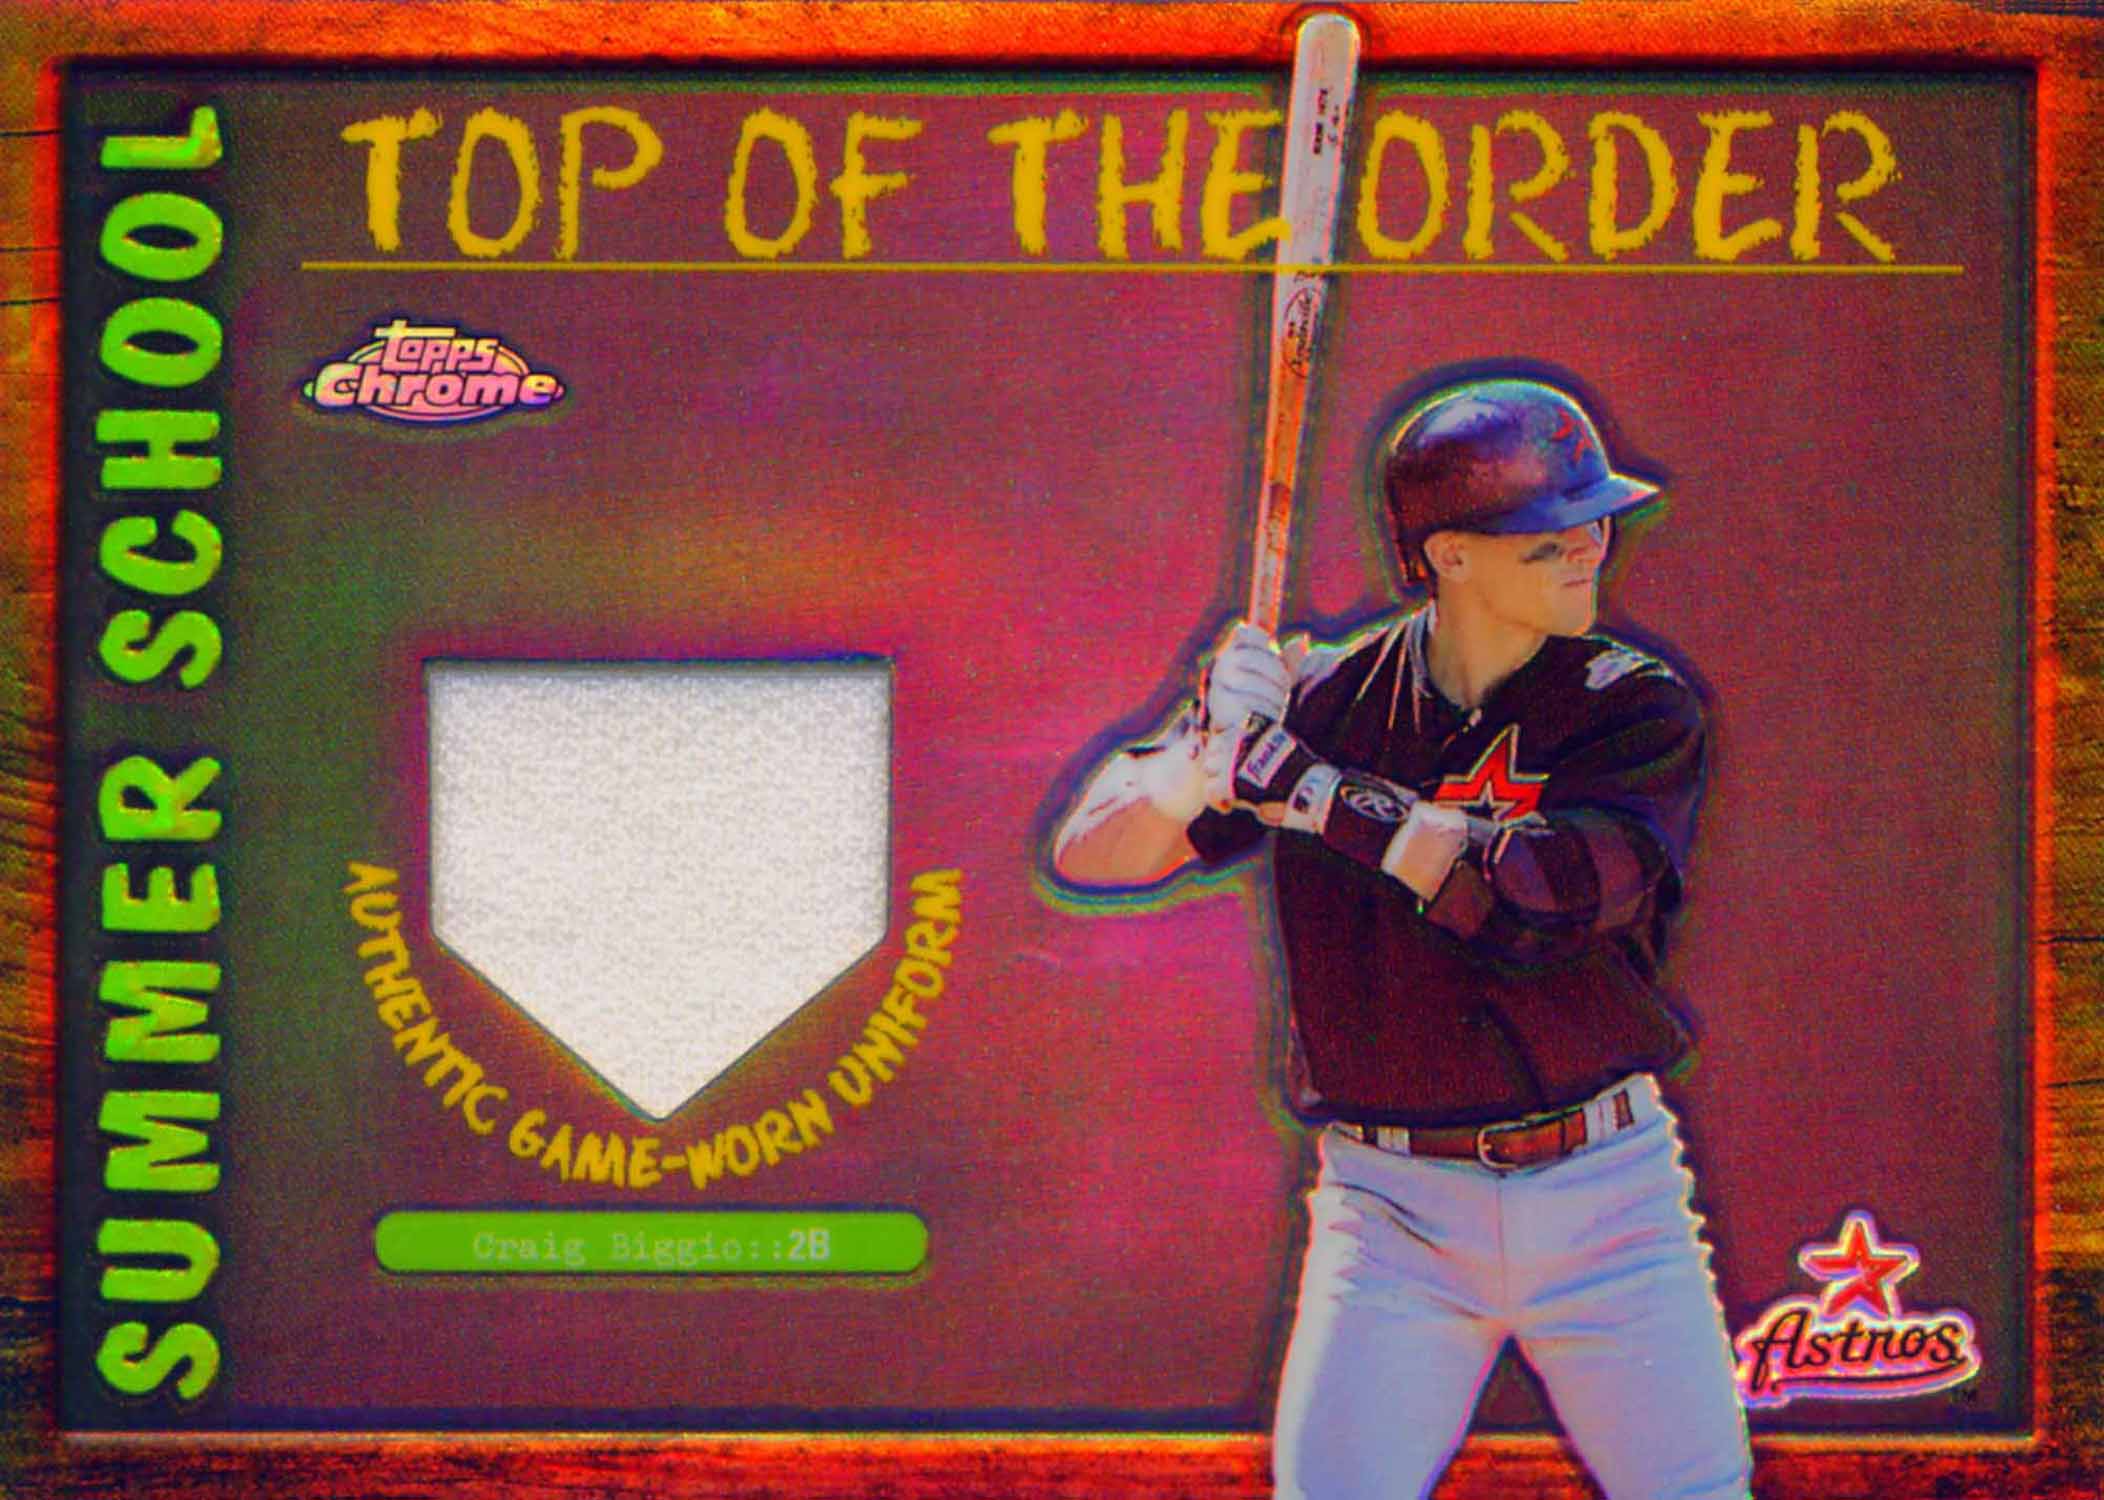 2002 Topps Chrome Summer School Top of the Order Relics Uniform